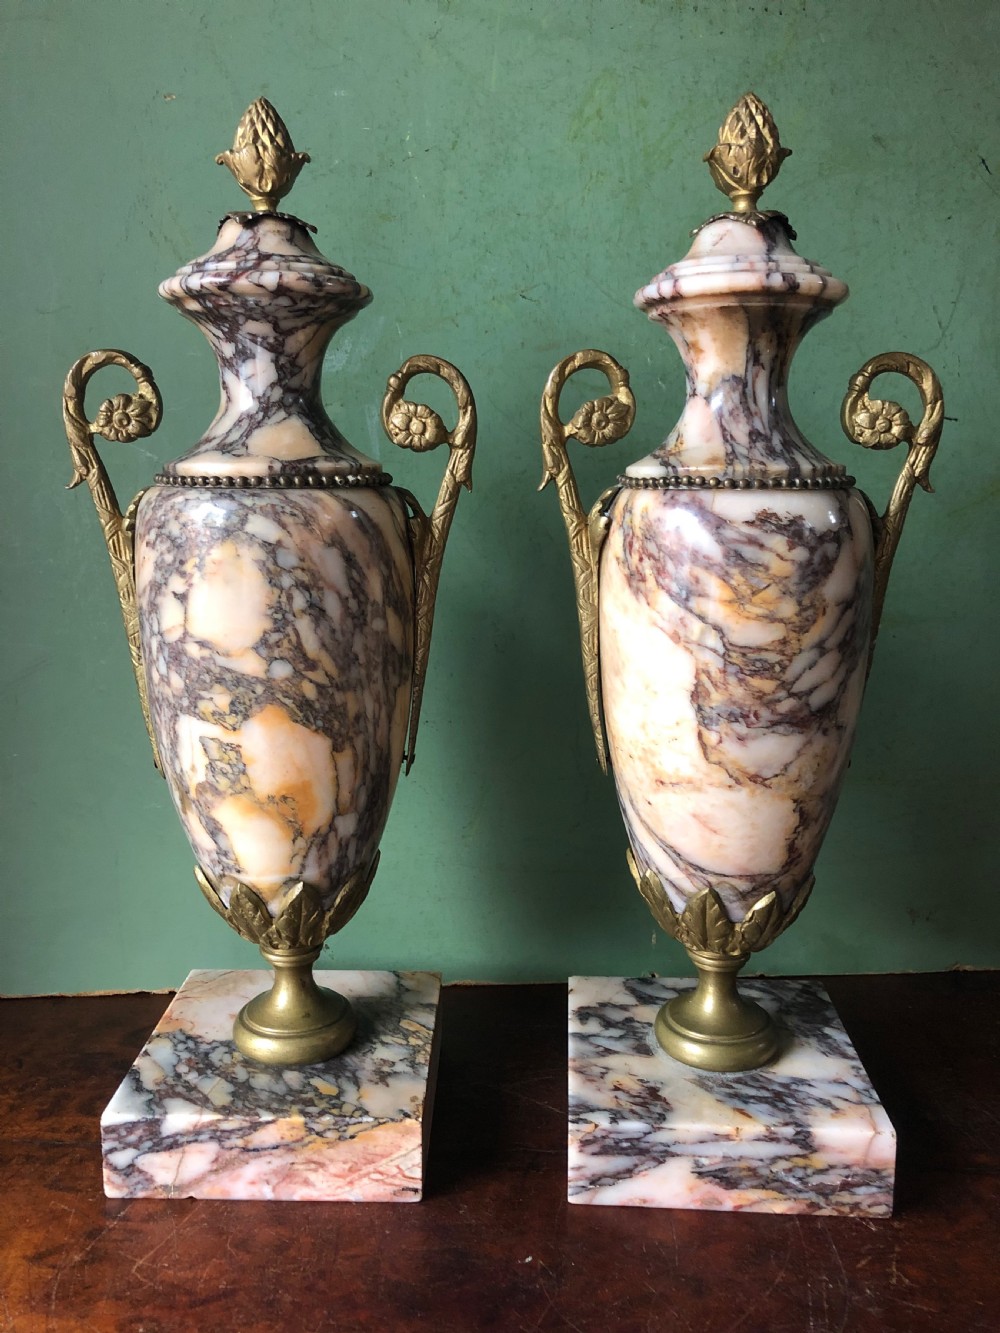 pair of late c19th early c20th french ormolumounted marble vases